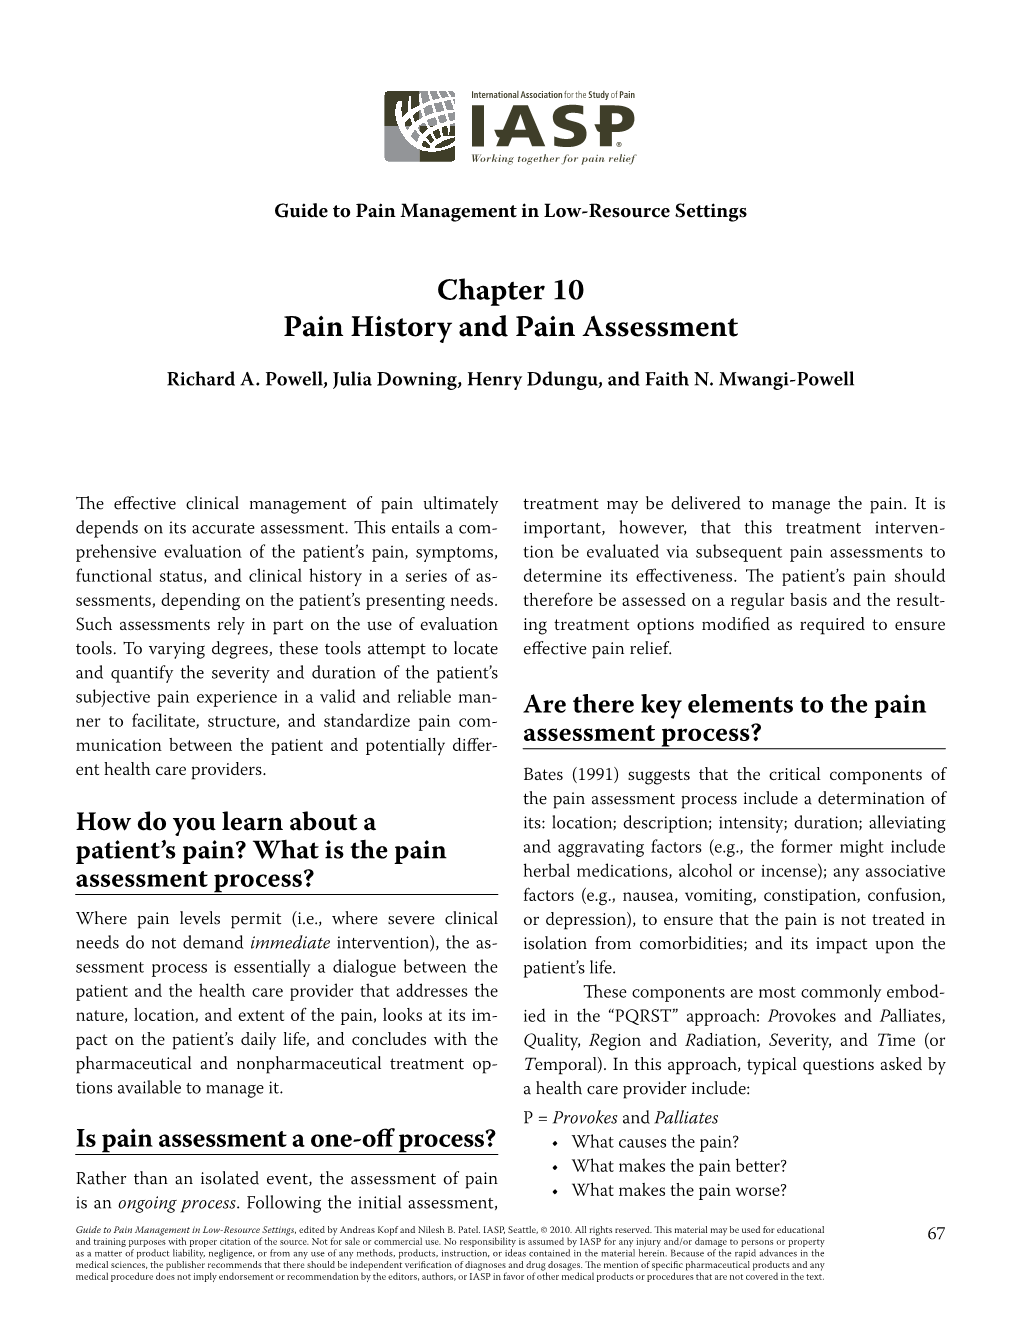 Chapter 10 Pain History and Pain Assessment